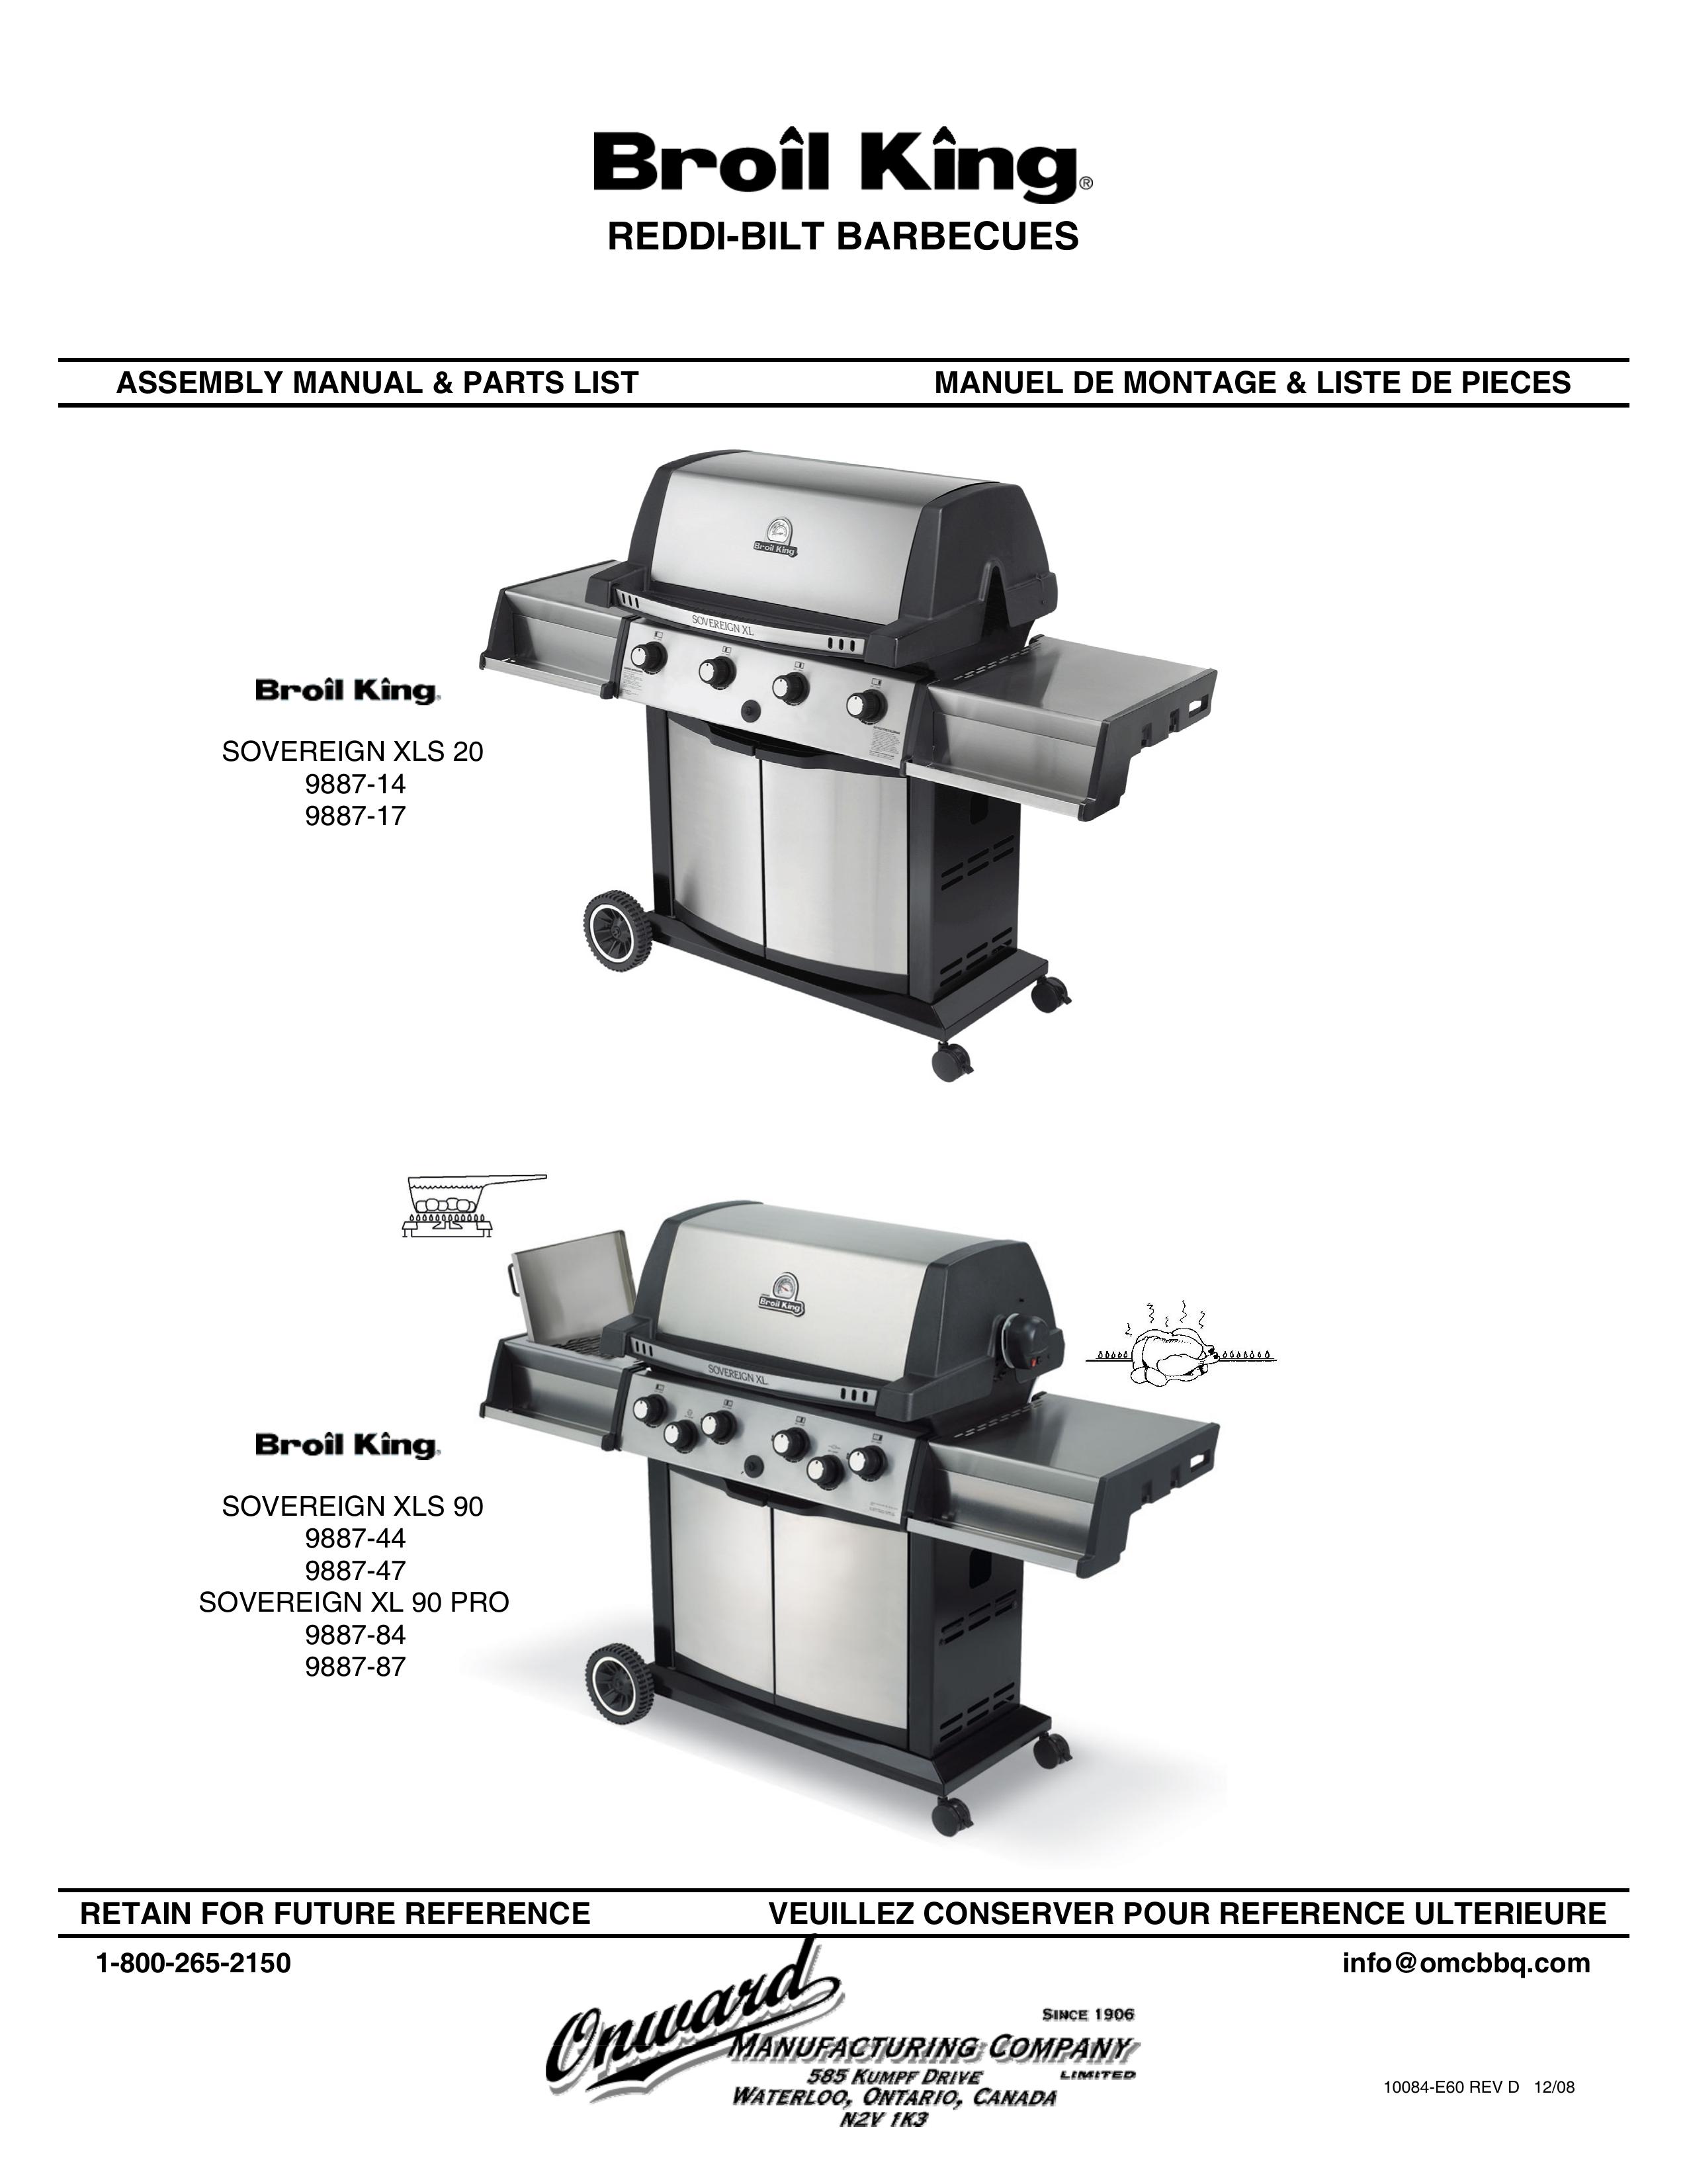 Broil King 9887-87 Electric Grill User Manual (Page 1)